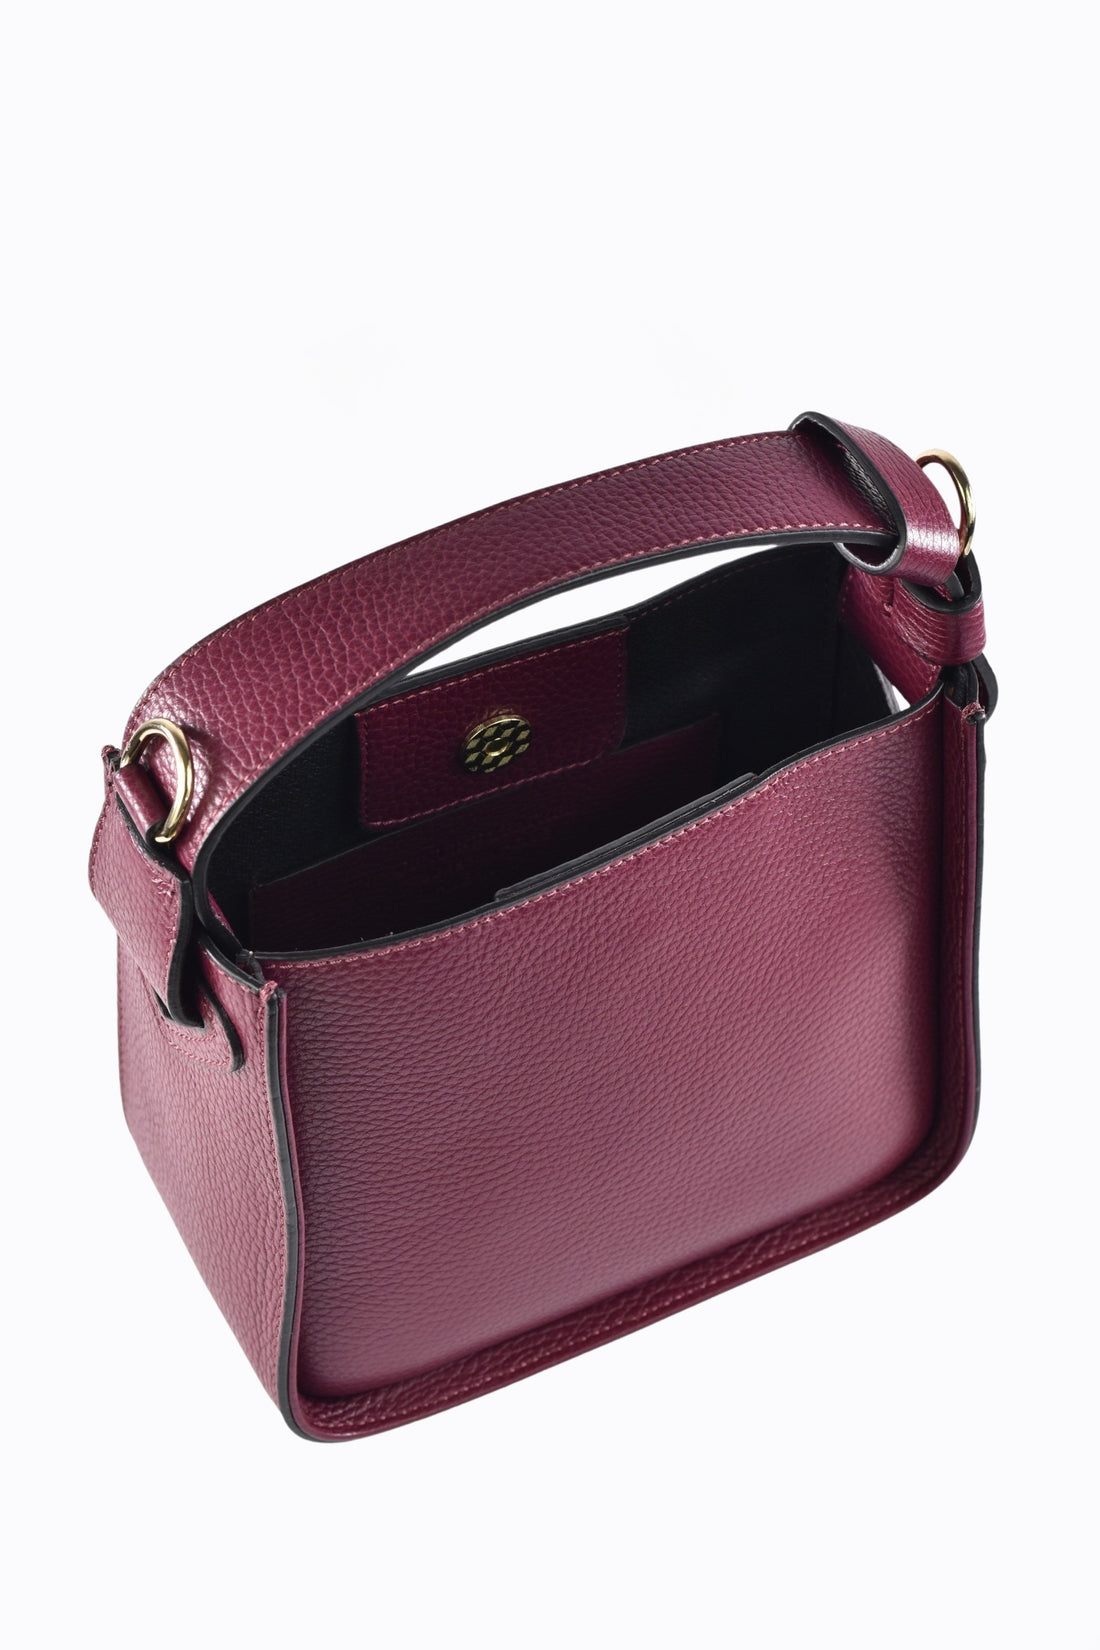 Kendall bag in Plum Dollar leather